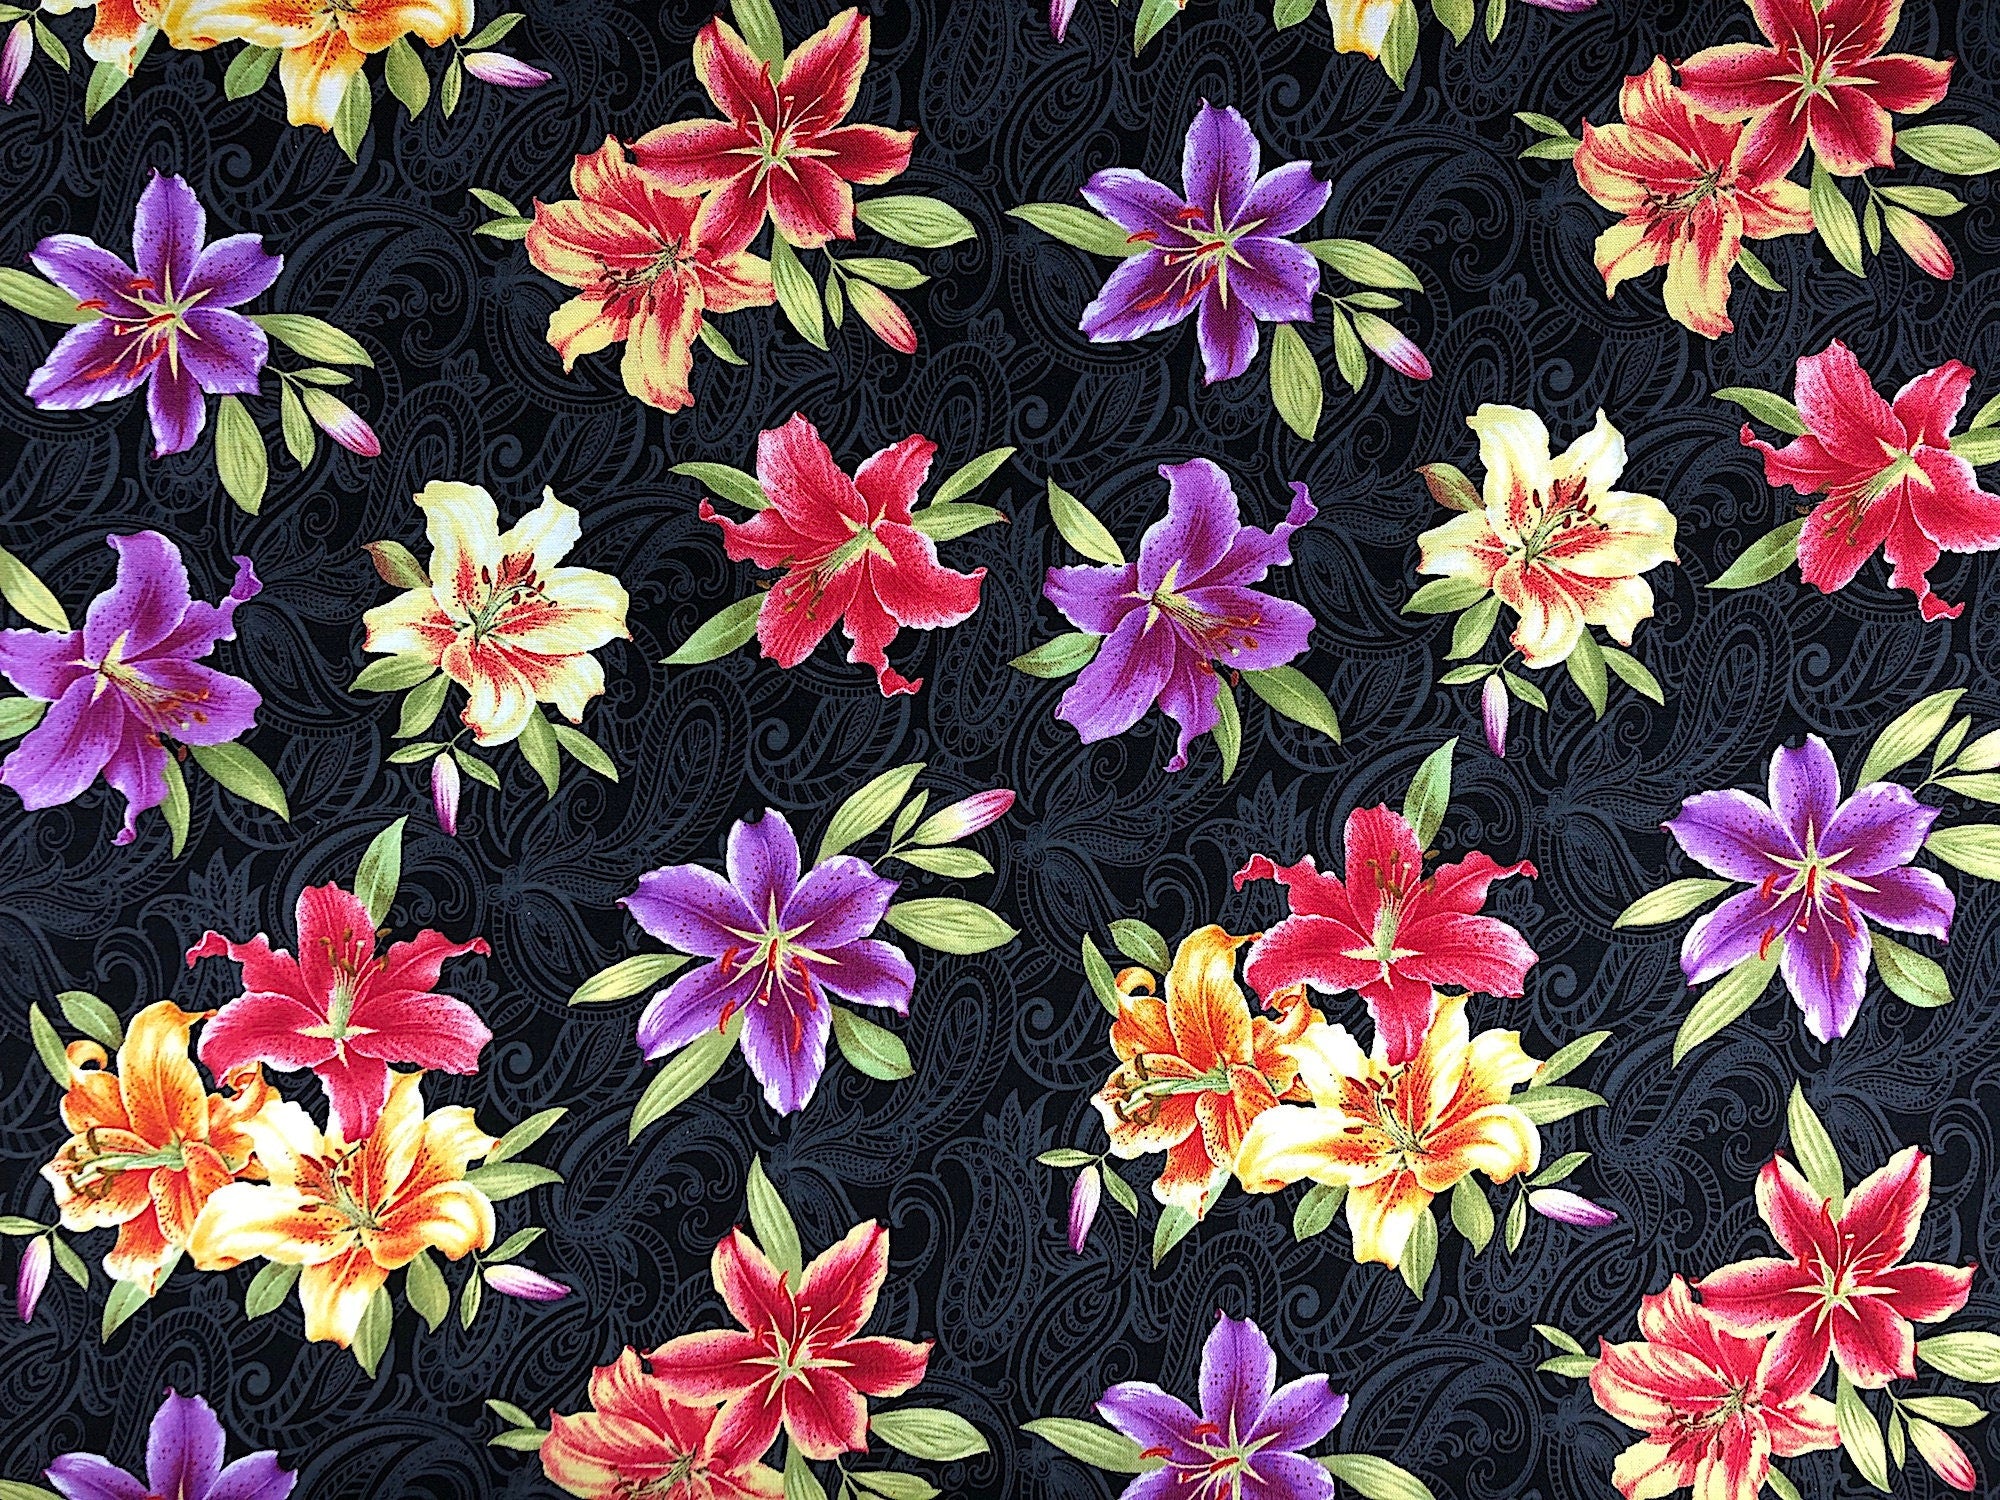 This fabric has yellow, purple and red lilies on a black background